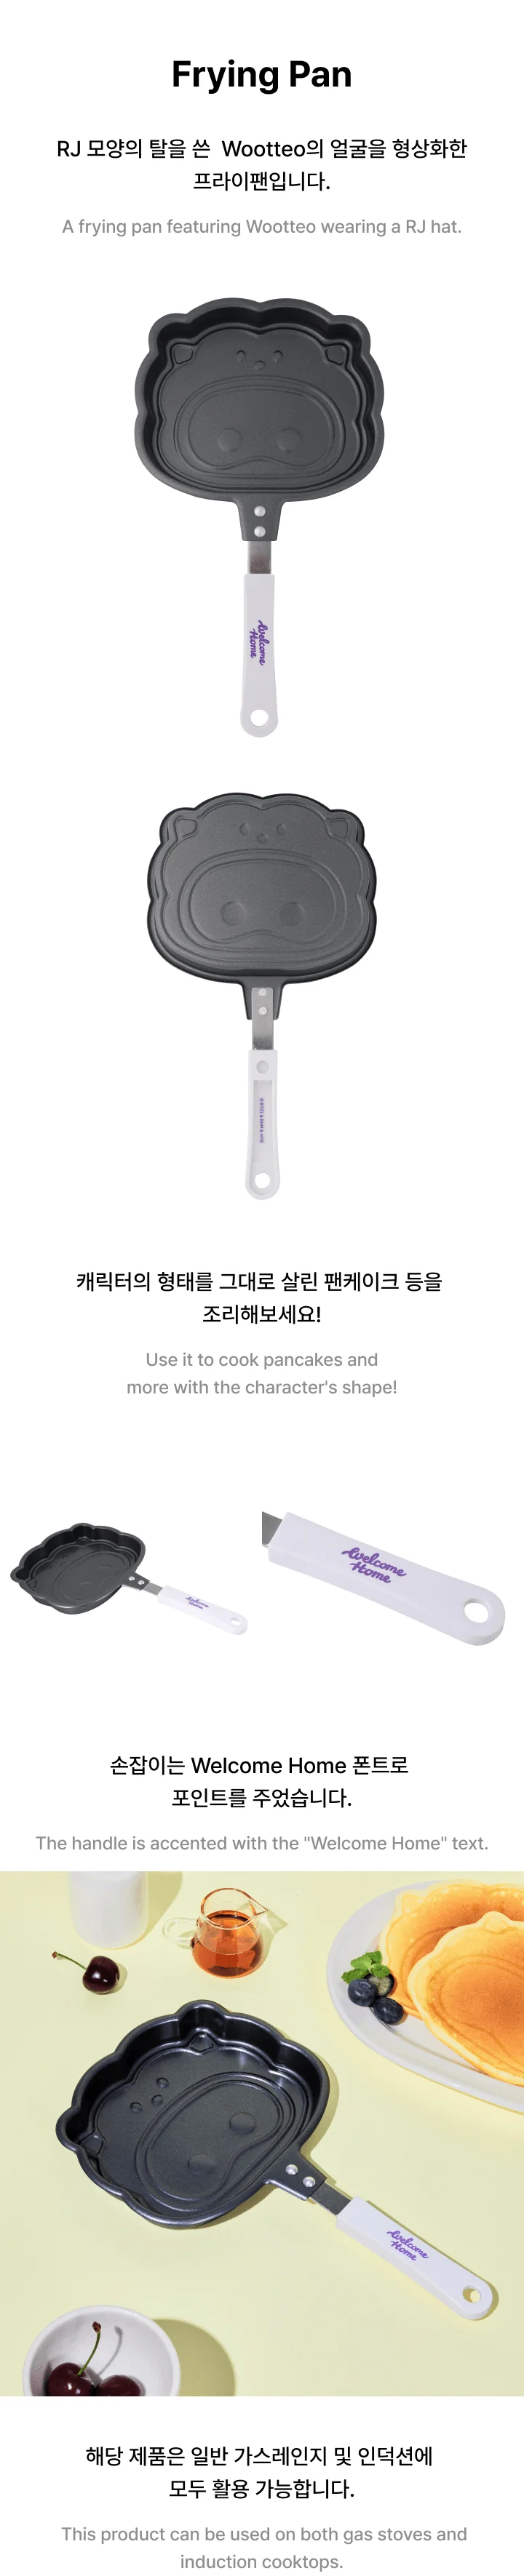 [PRE ORDER] WOOTEO X RJ Collaboration (Official MD) / FRYING PAN